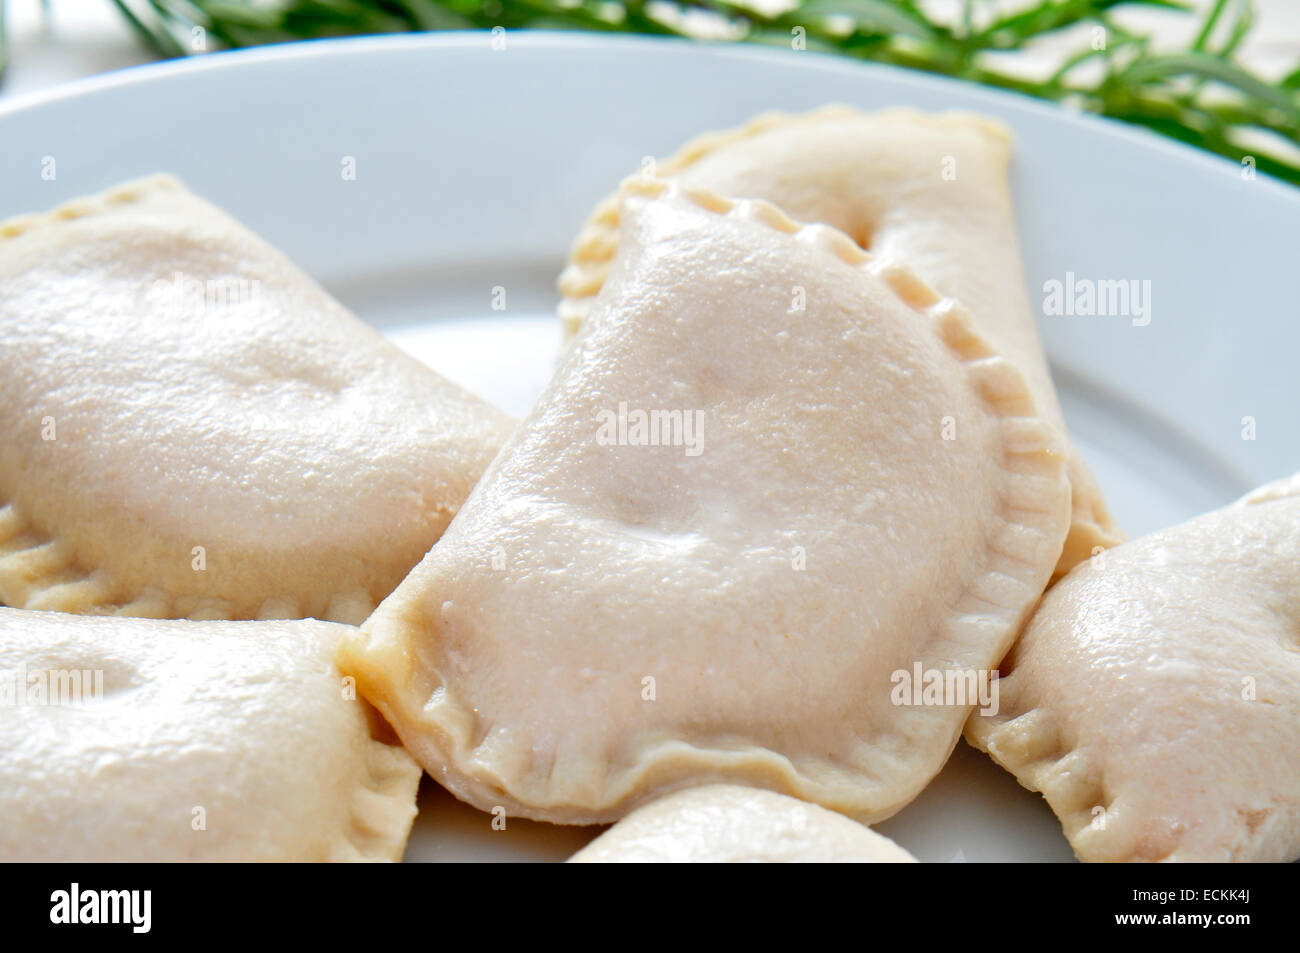 closeup of a plate with some uncooked spanish empanadillas, small meat or tuna pies Stock Photo